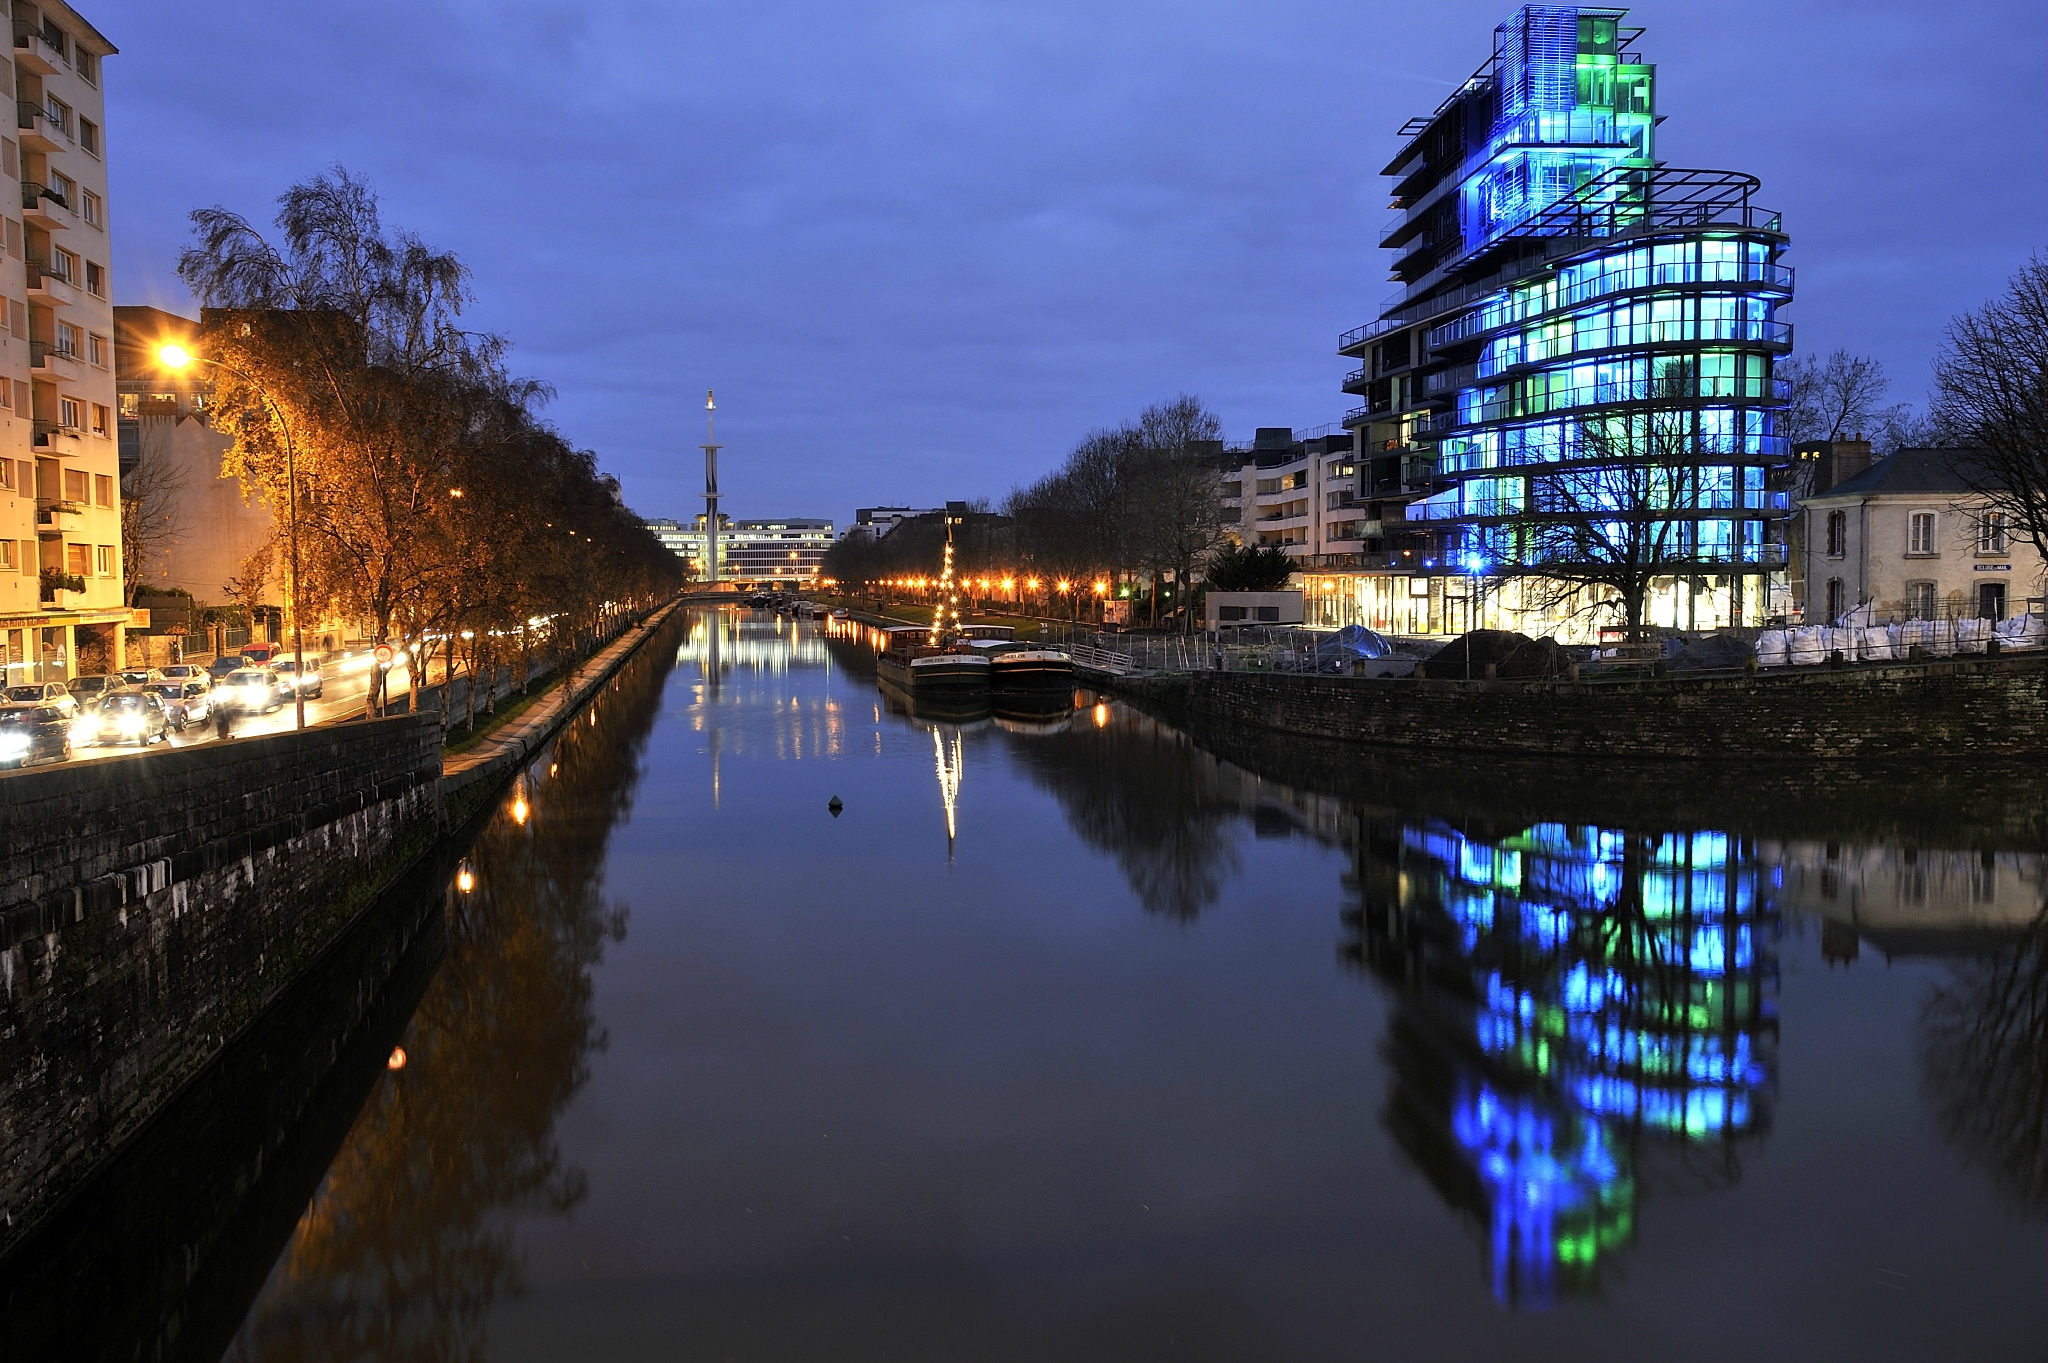 Cap Mail by night, Rennes - Alain Rehault